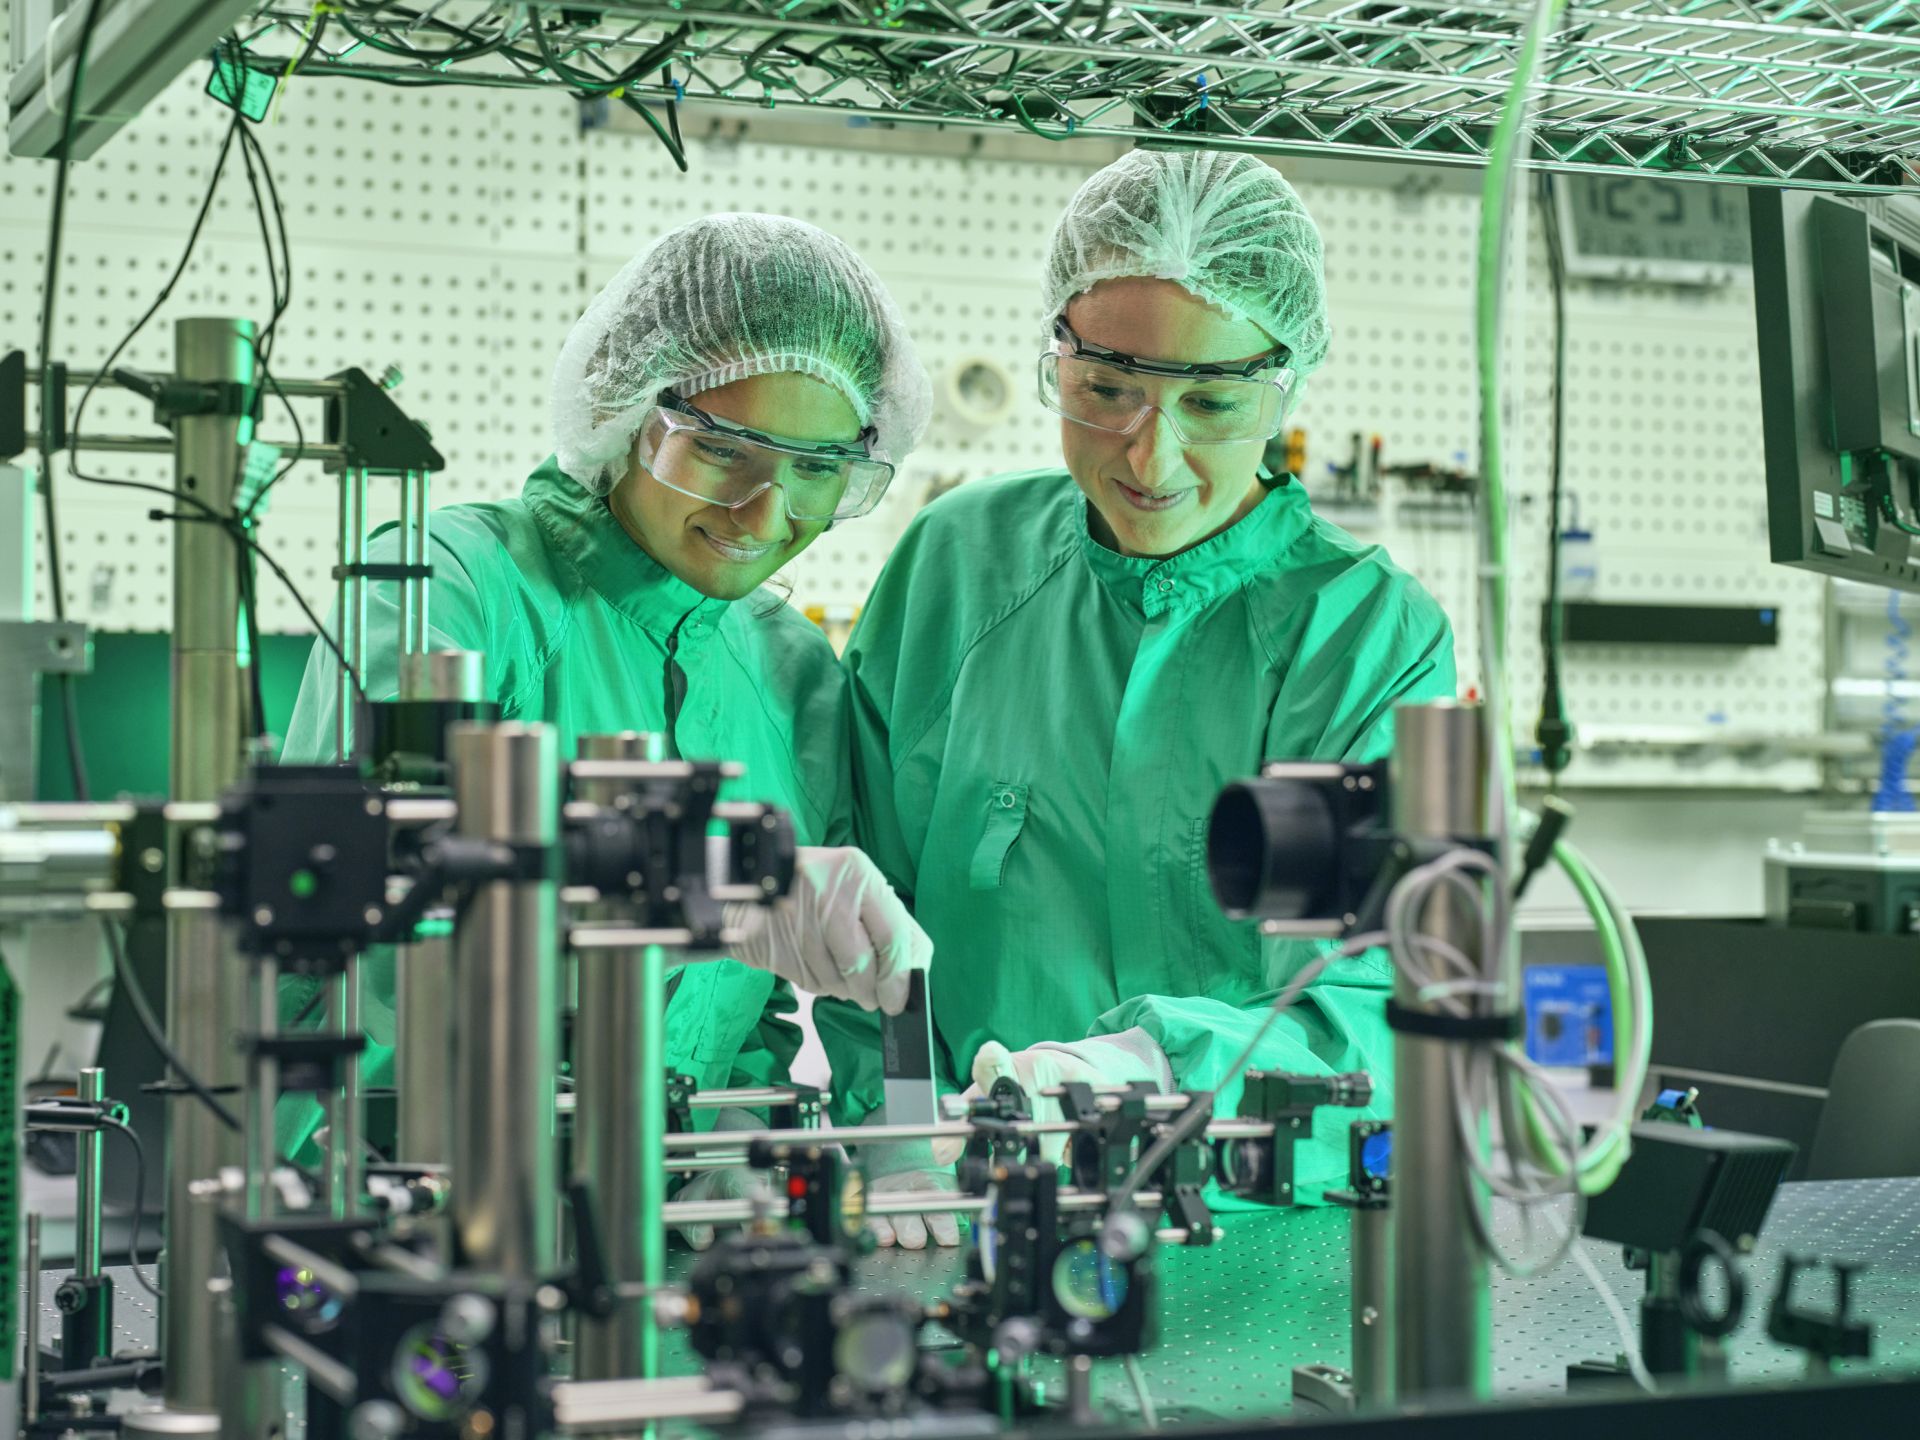 Researchers work on an optical setup in the laboratory.